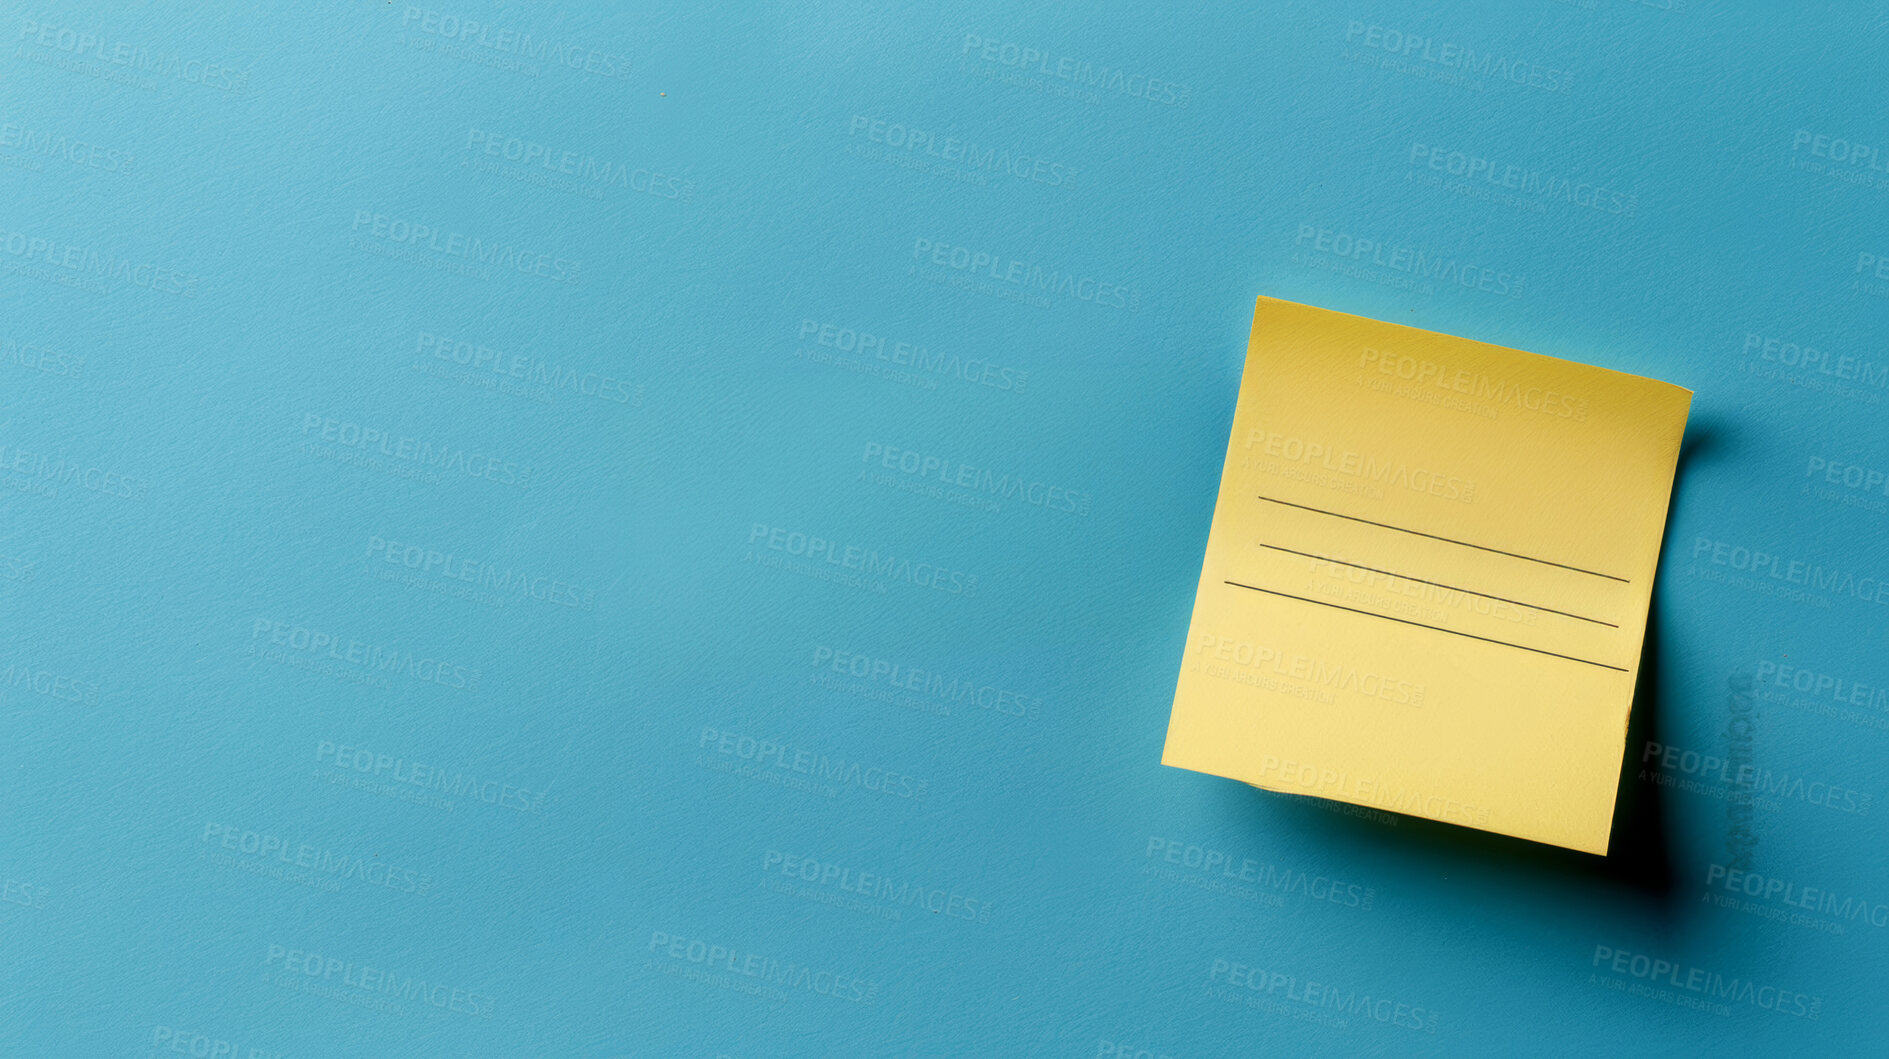 Buy stock photo Sticky note, lines and mockup space with paper for reminder, tasks or agenda on a blue background. Empty document, sign or small tab for schedule planning, brainstorming or post for checklist or tips